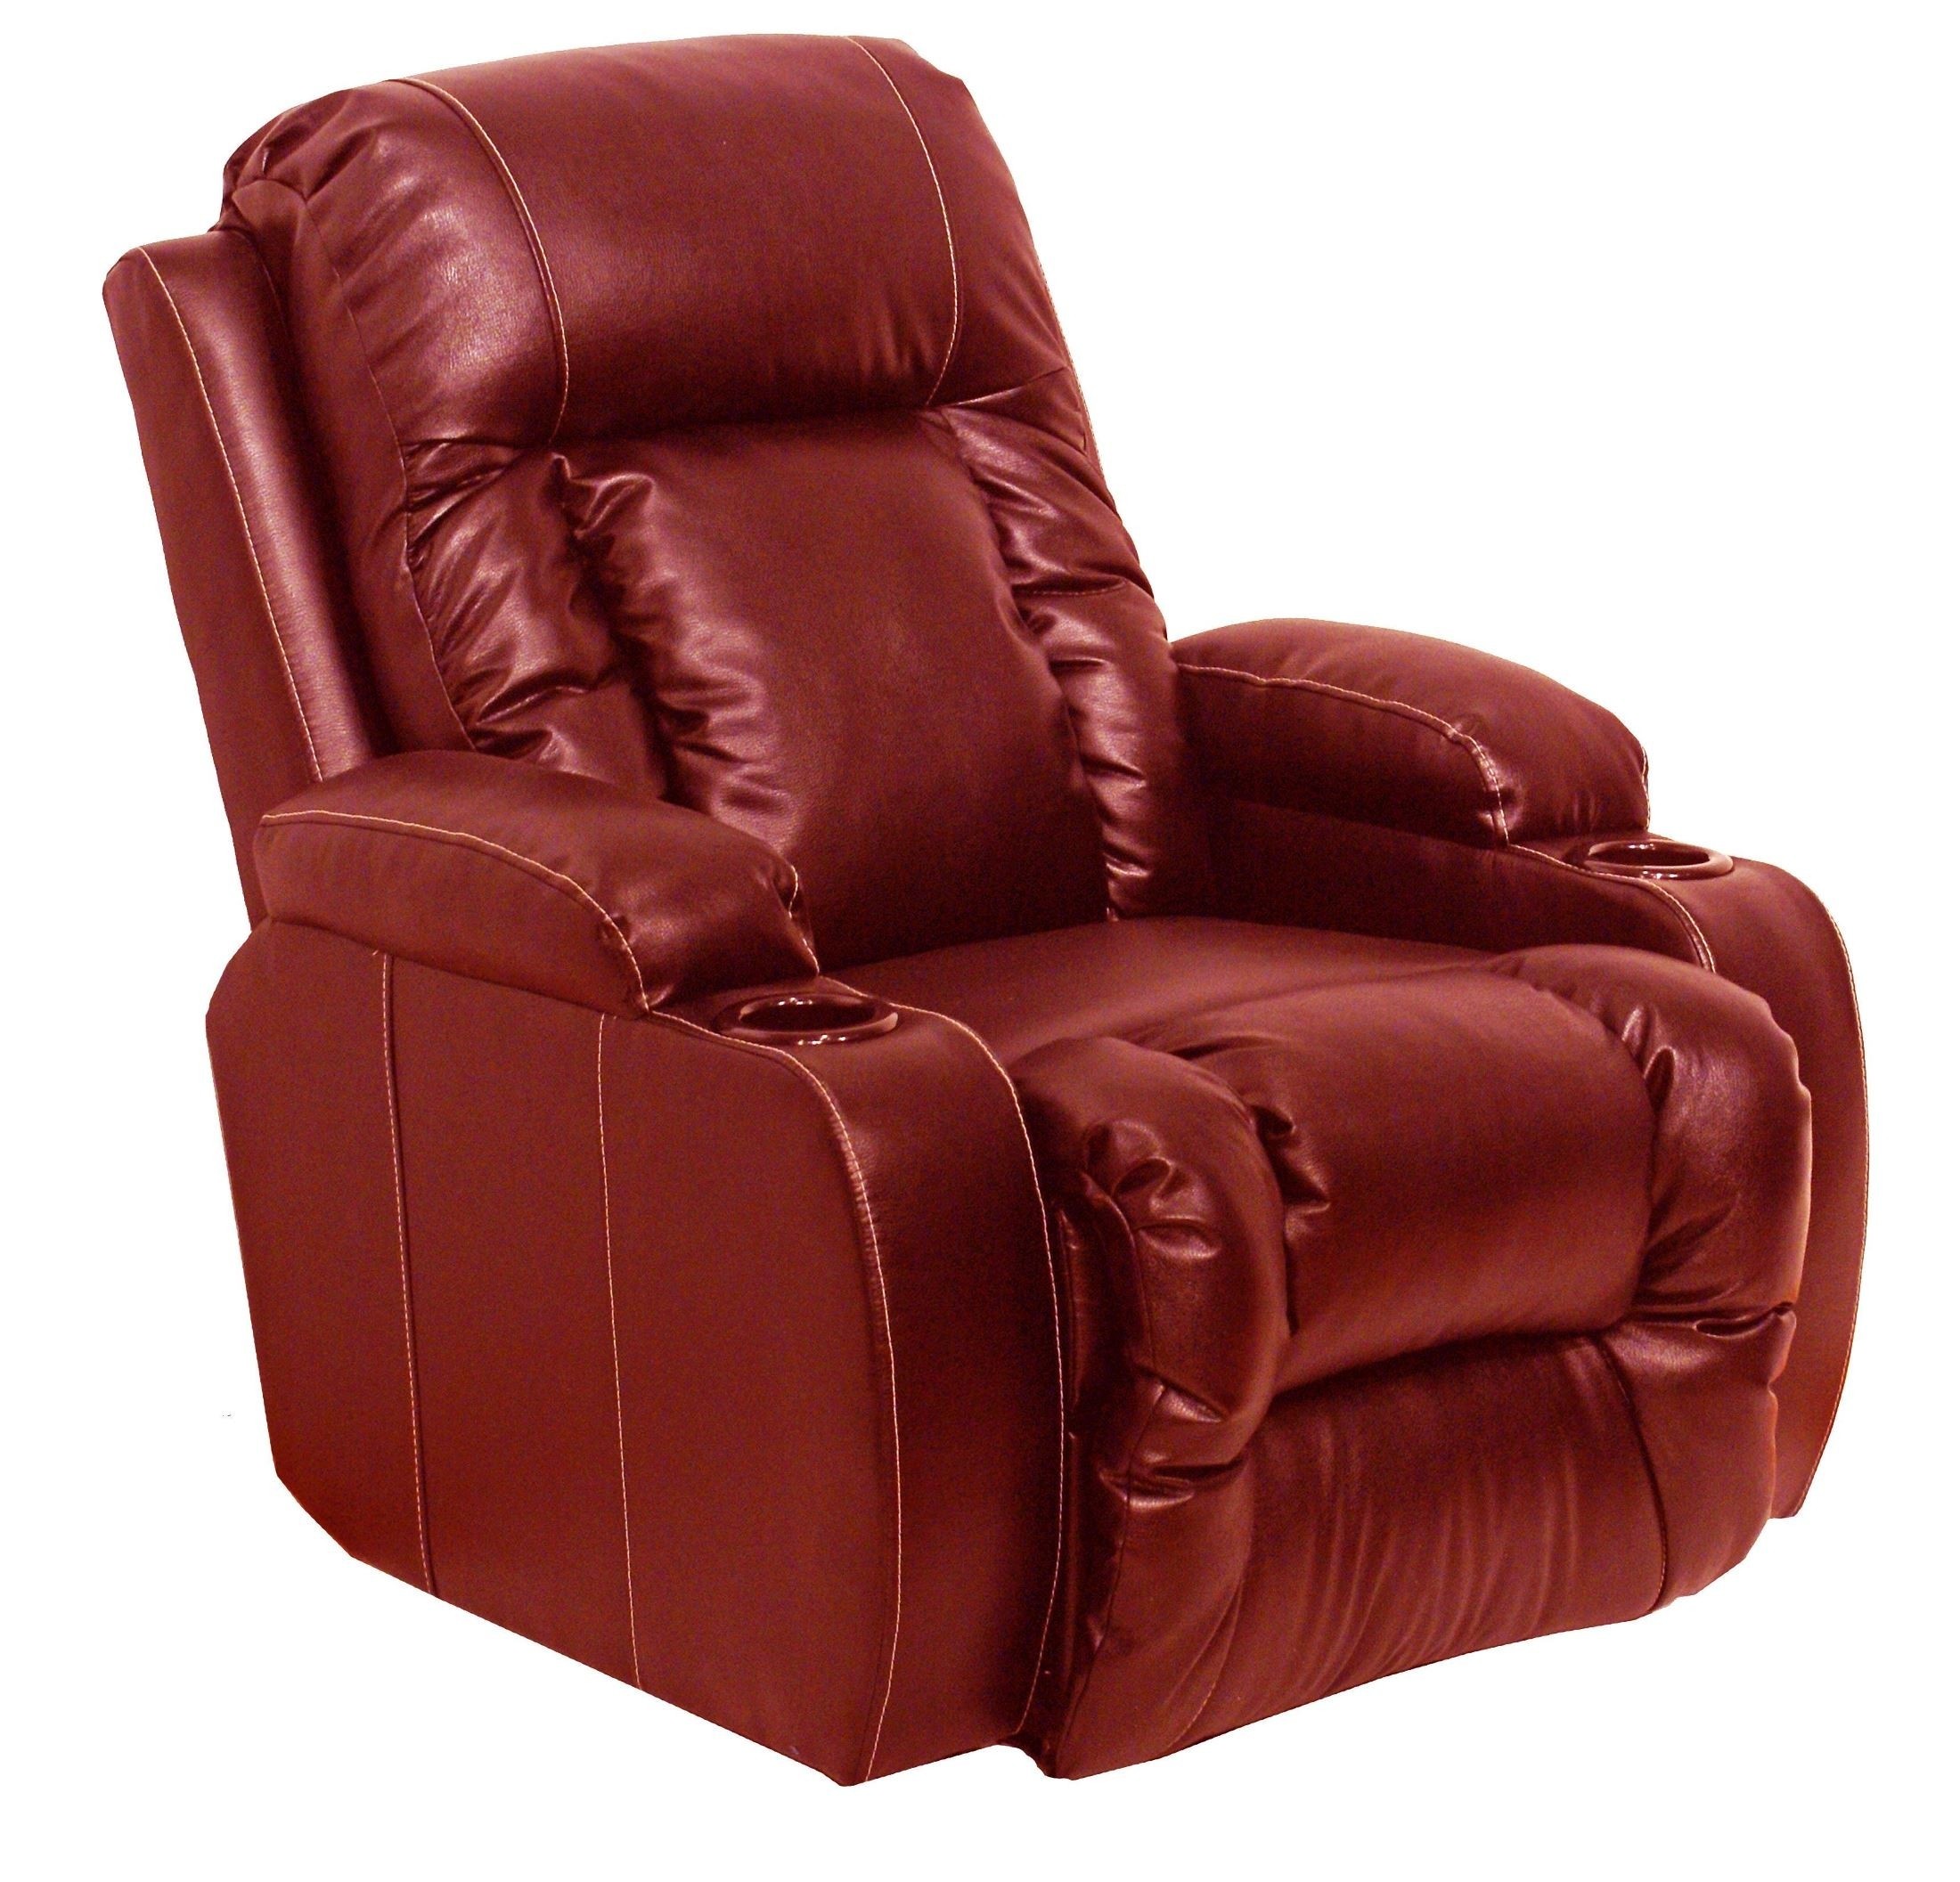 Top gun red leather power recliner from catnapper